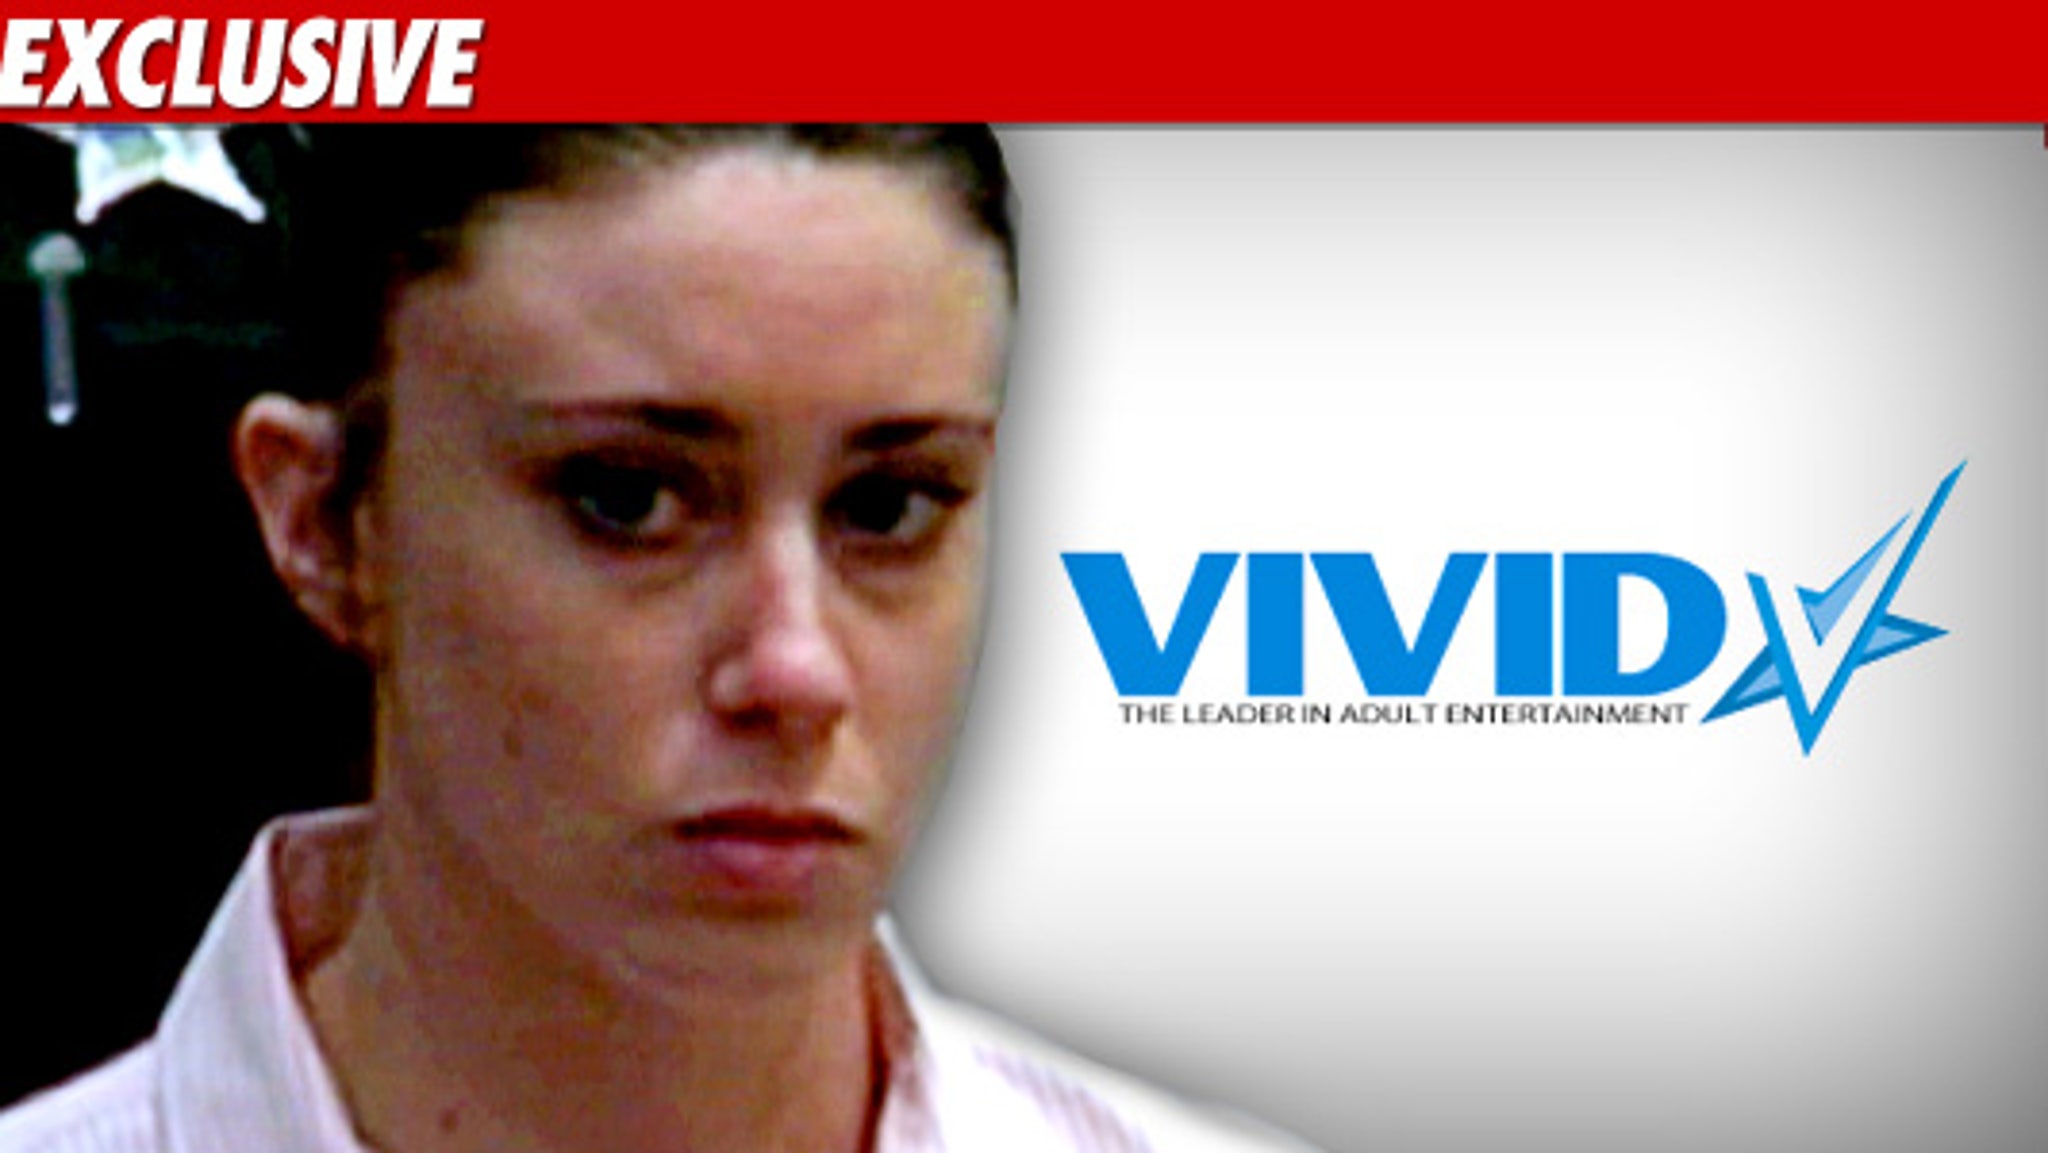 Porn King Casey Anthony Could Be Killer XXX Star